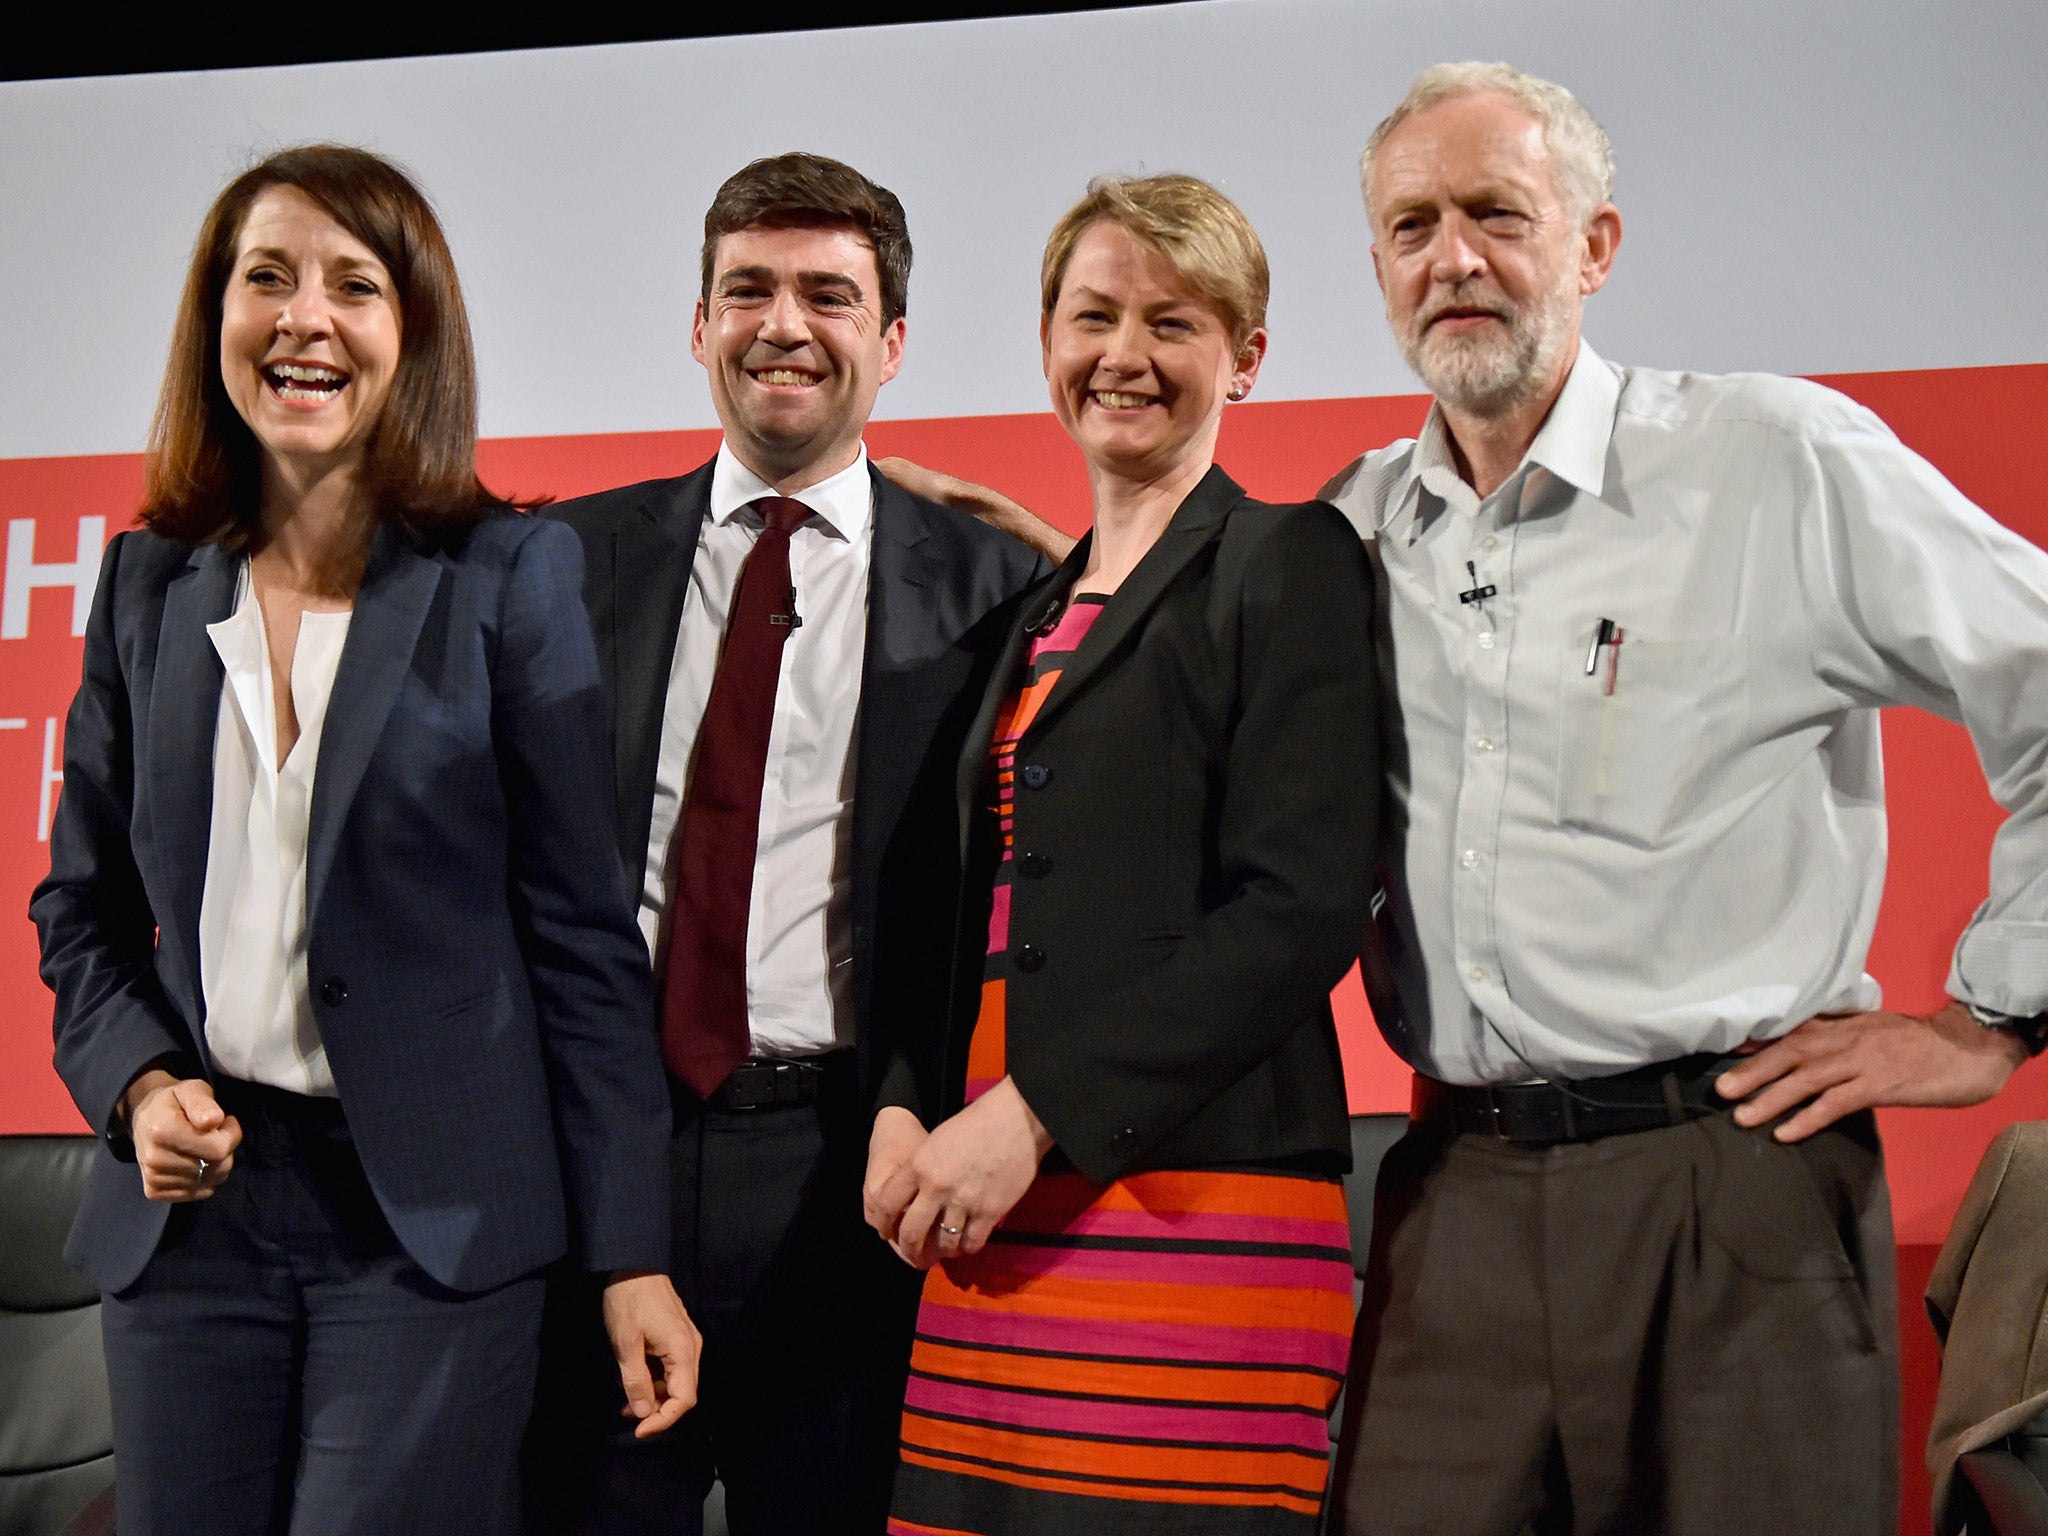 The contenders for the upcoming Labour leadership election